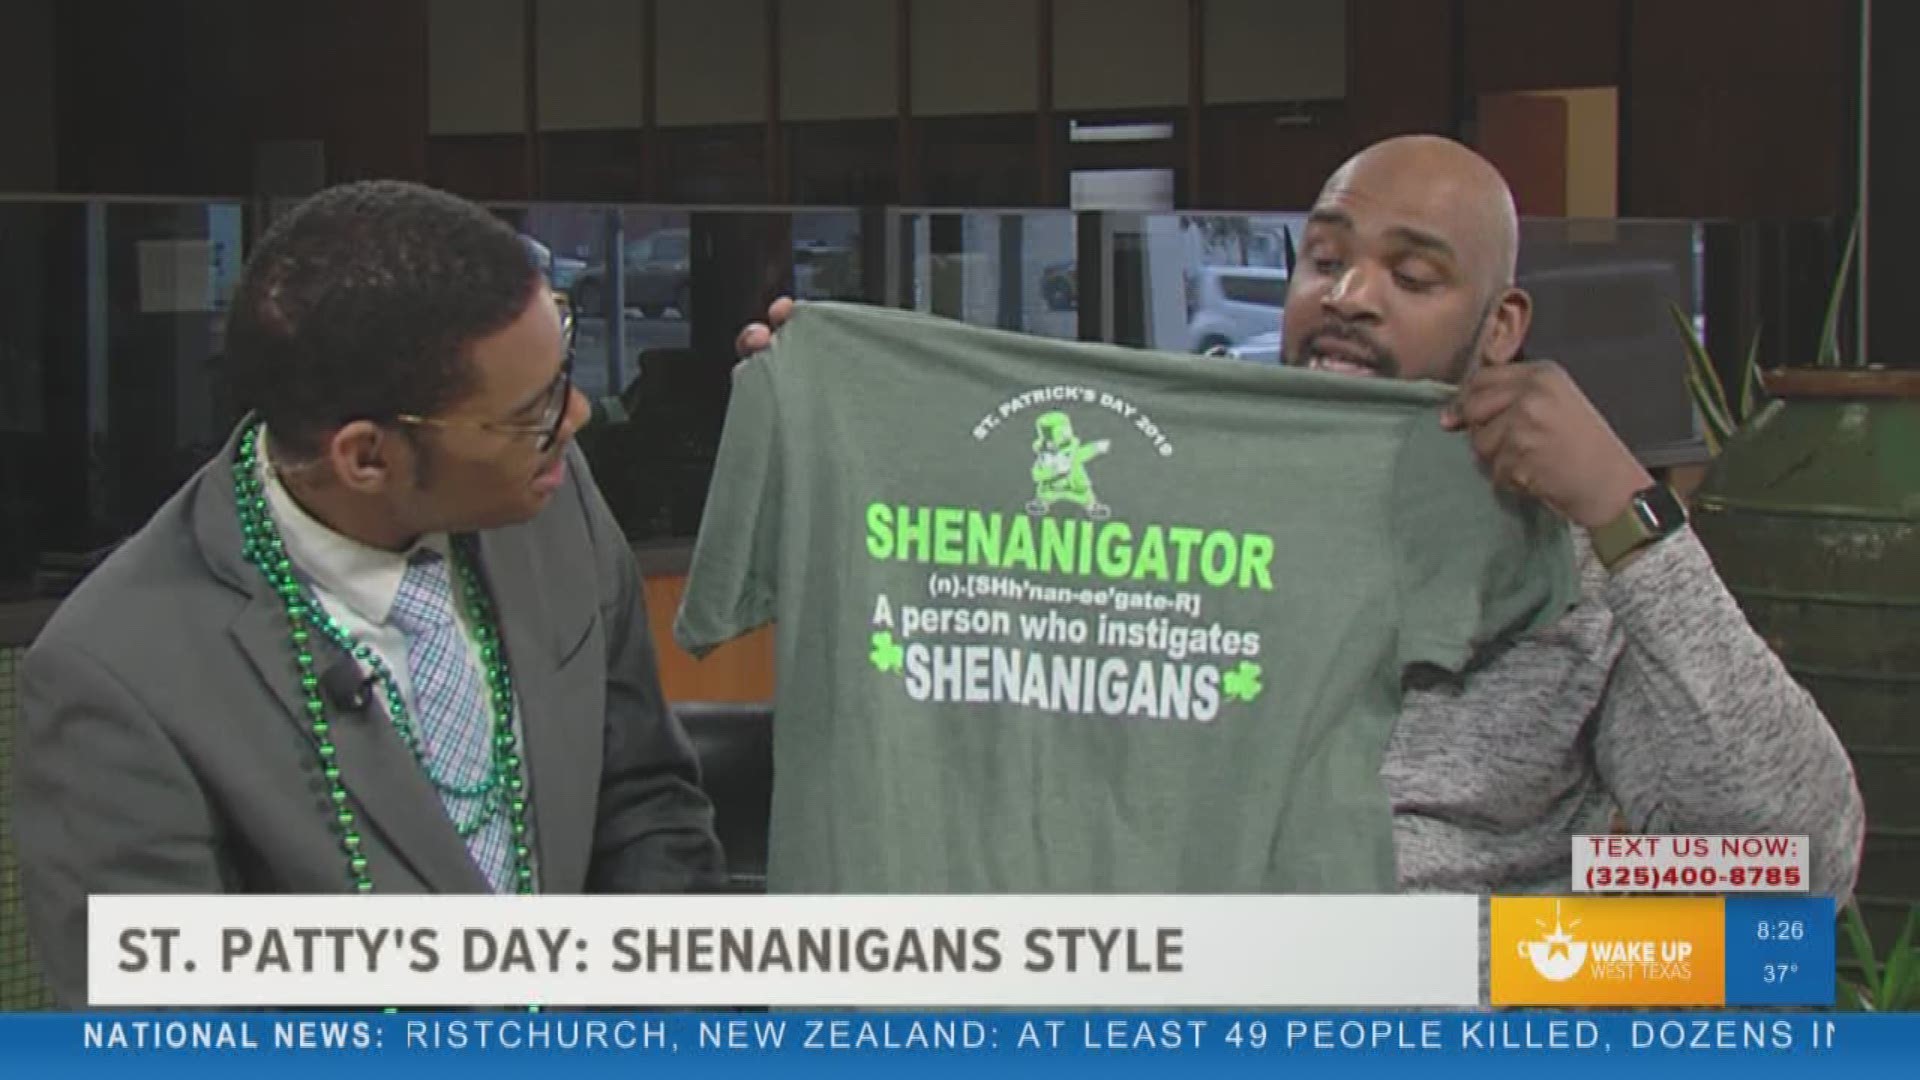 Our Malik Mingo spoke with Shenanigans Sports Bar and Grill about their weekend events for St. Patrick's Day!